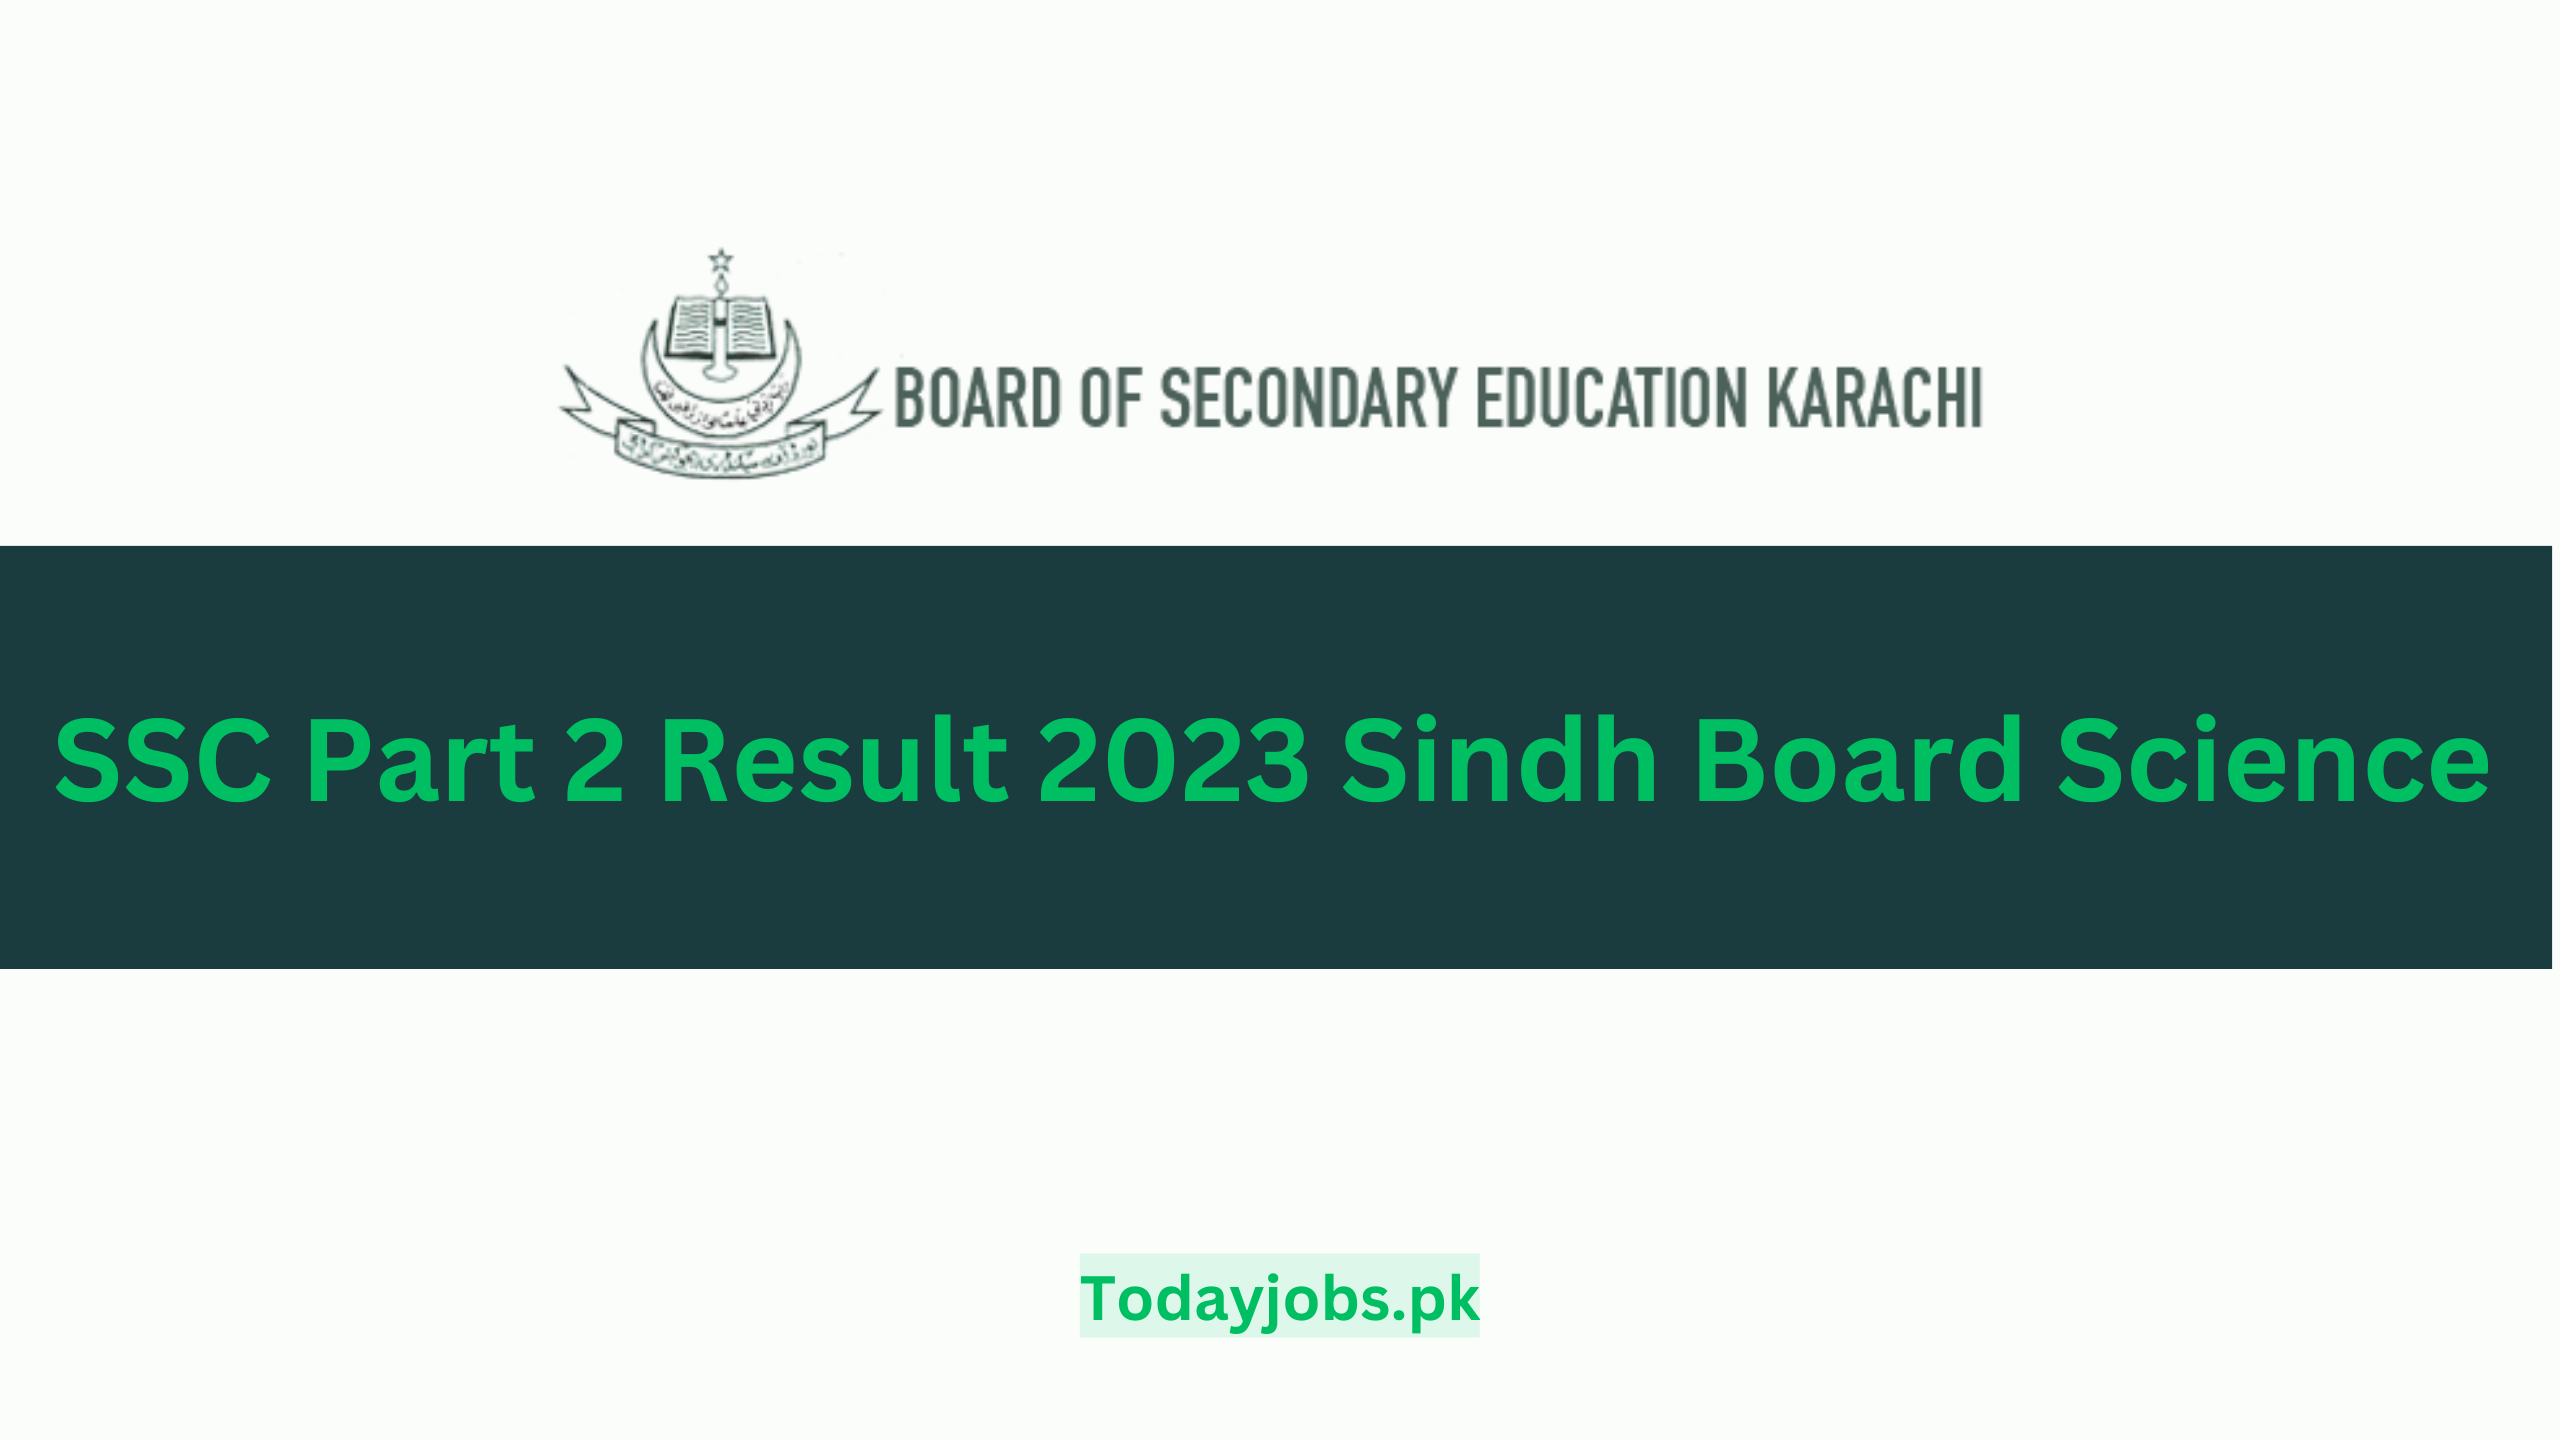 SSC Part 2 Result 2023 Sindh Board Science by Roll No and Name